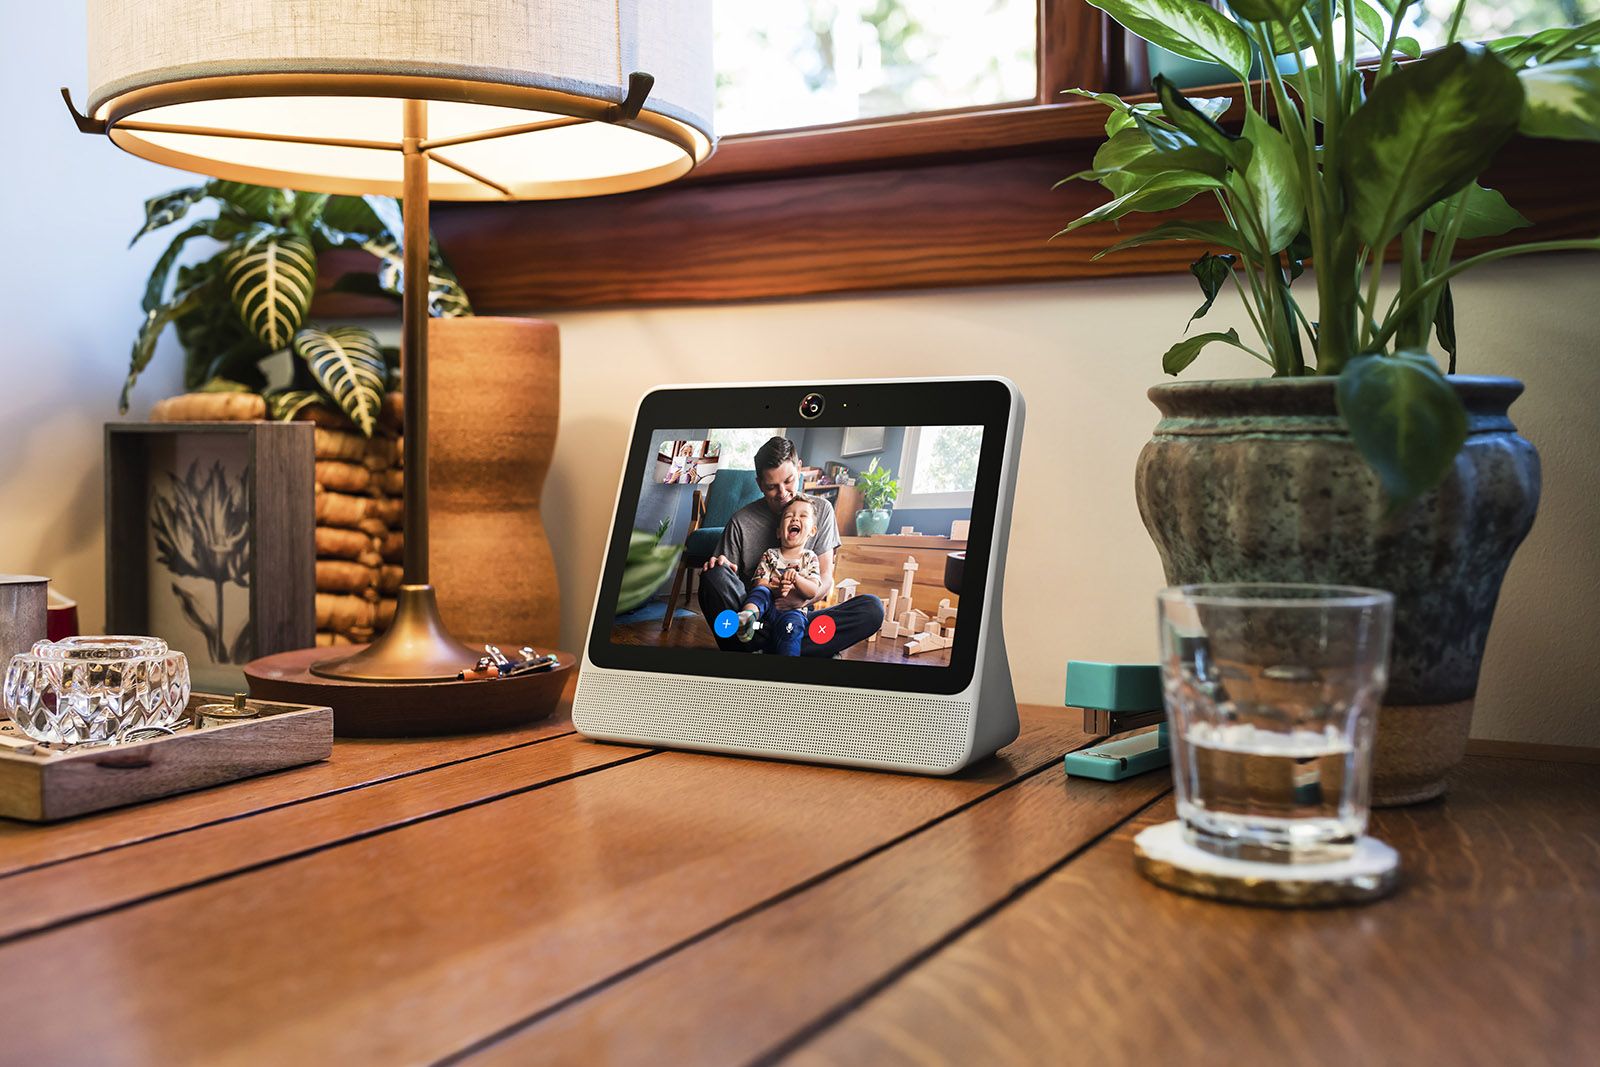 Facebook Portal and Portal take aim at Echo Show with video calling and Alexa built-in image 1